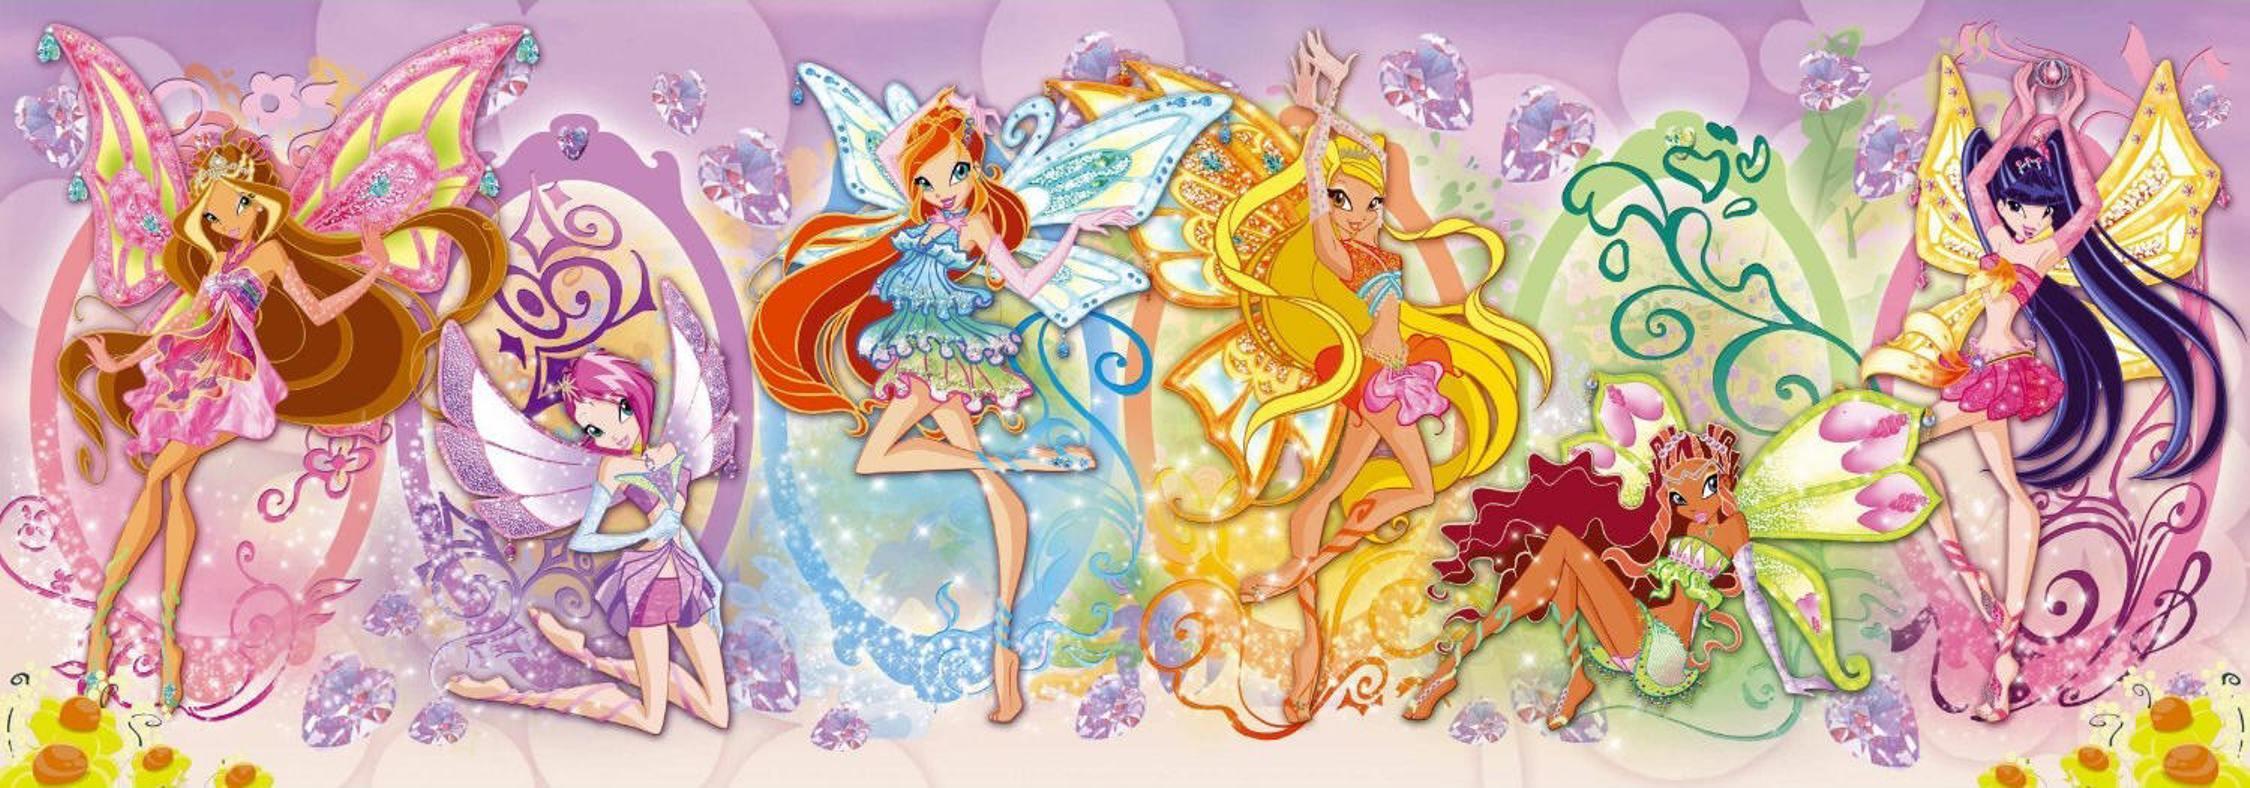 Winx Club Wallpaper Free Download Gallery (77 Plus) PIC WPW503895